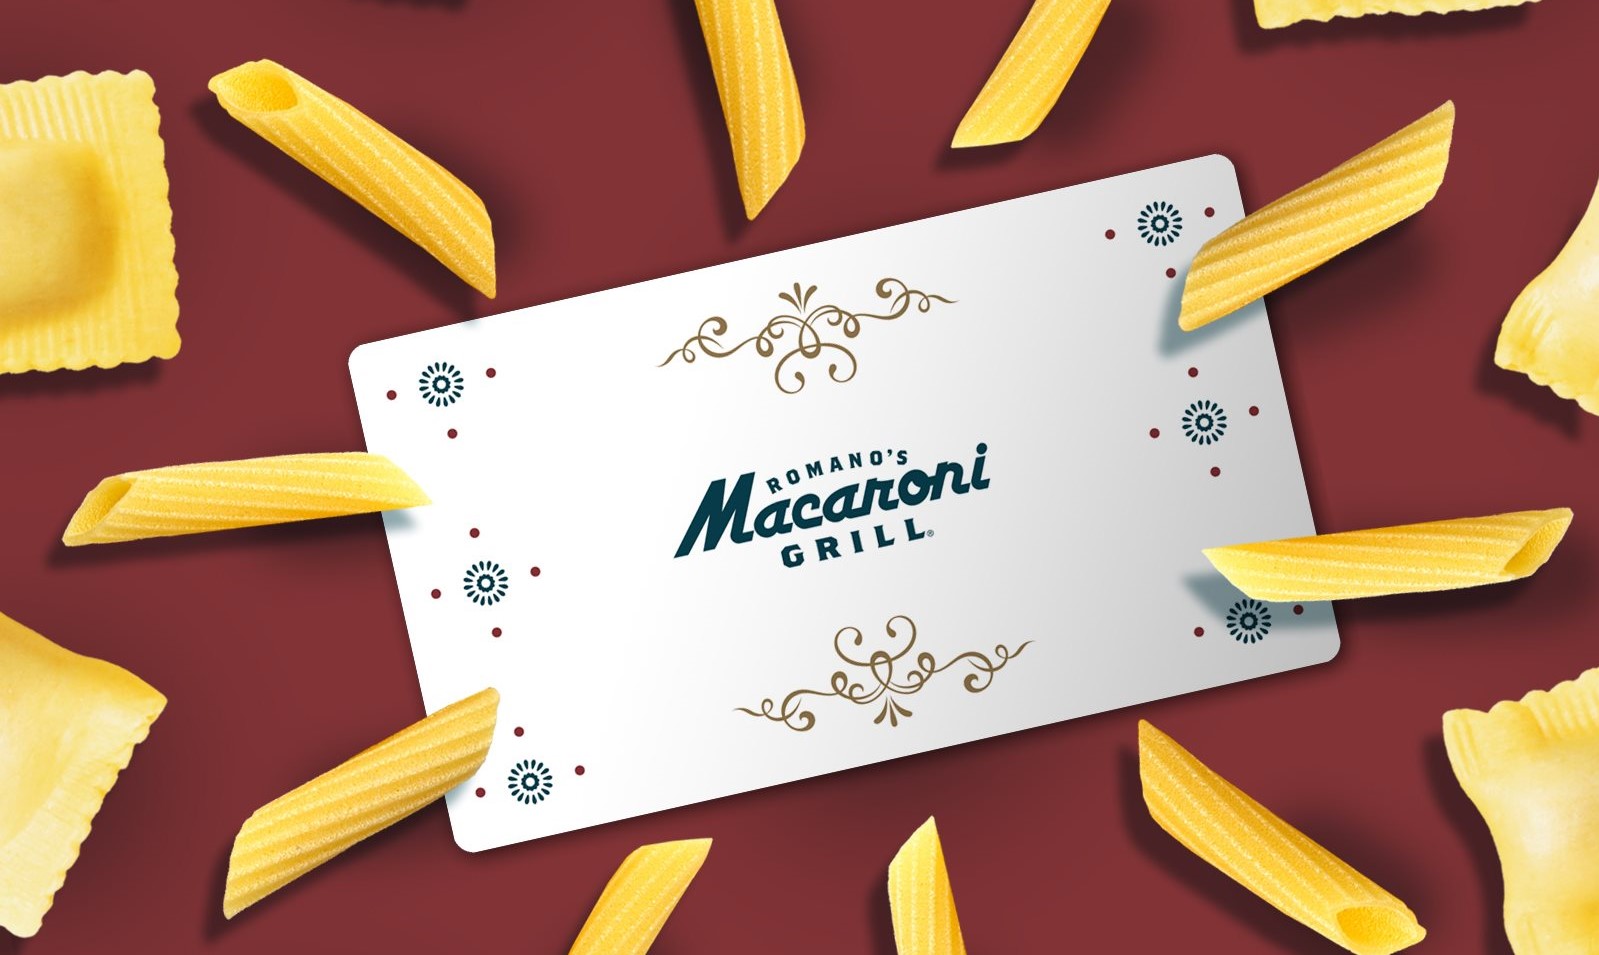 gift card surrounded by noodles